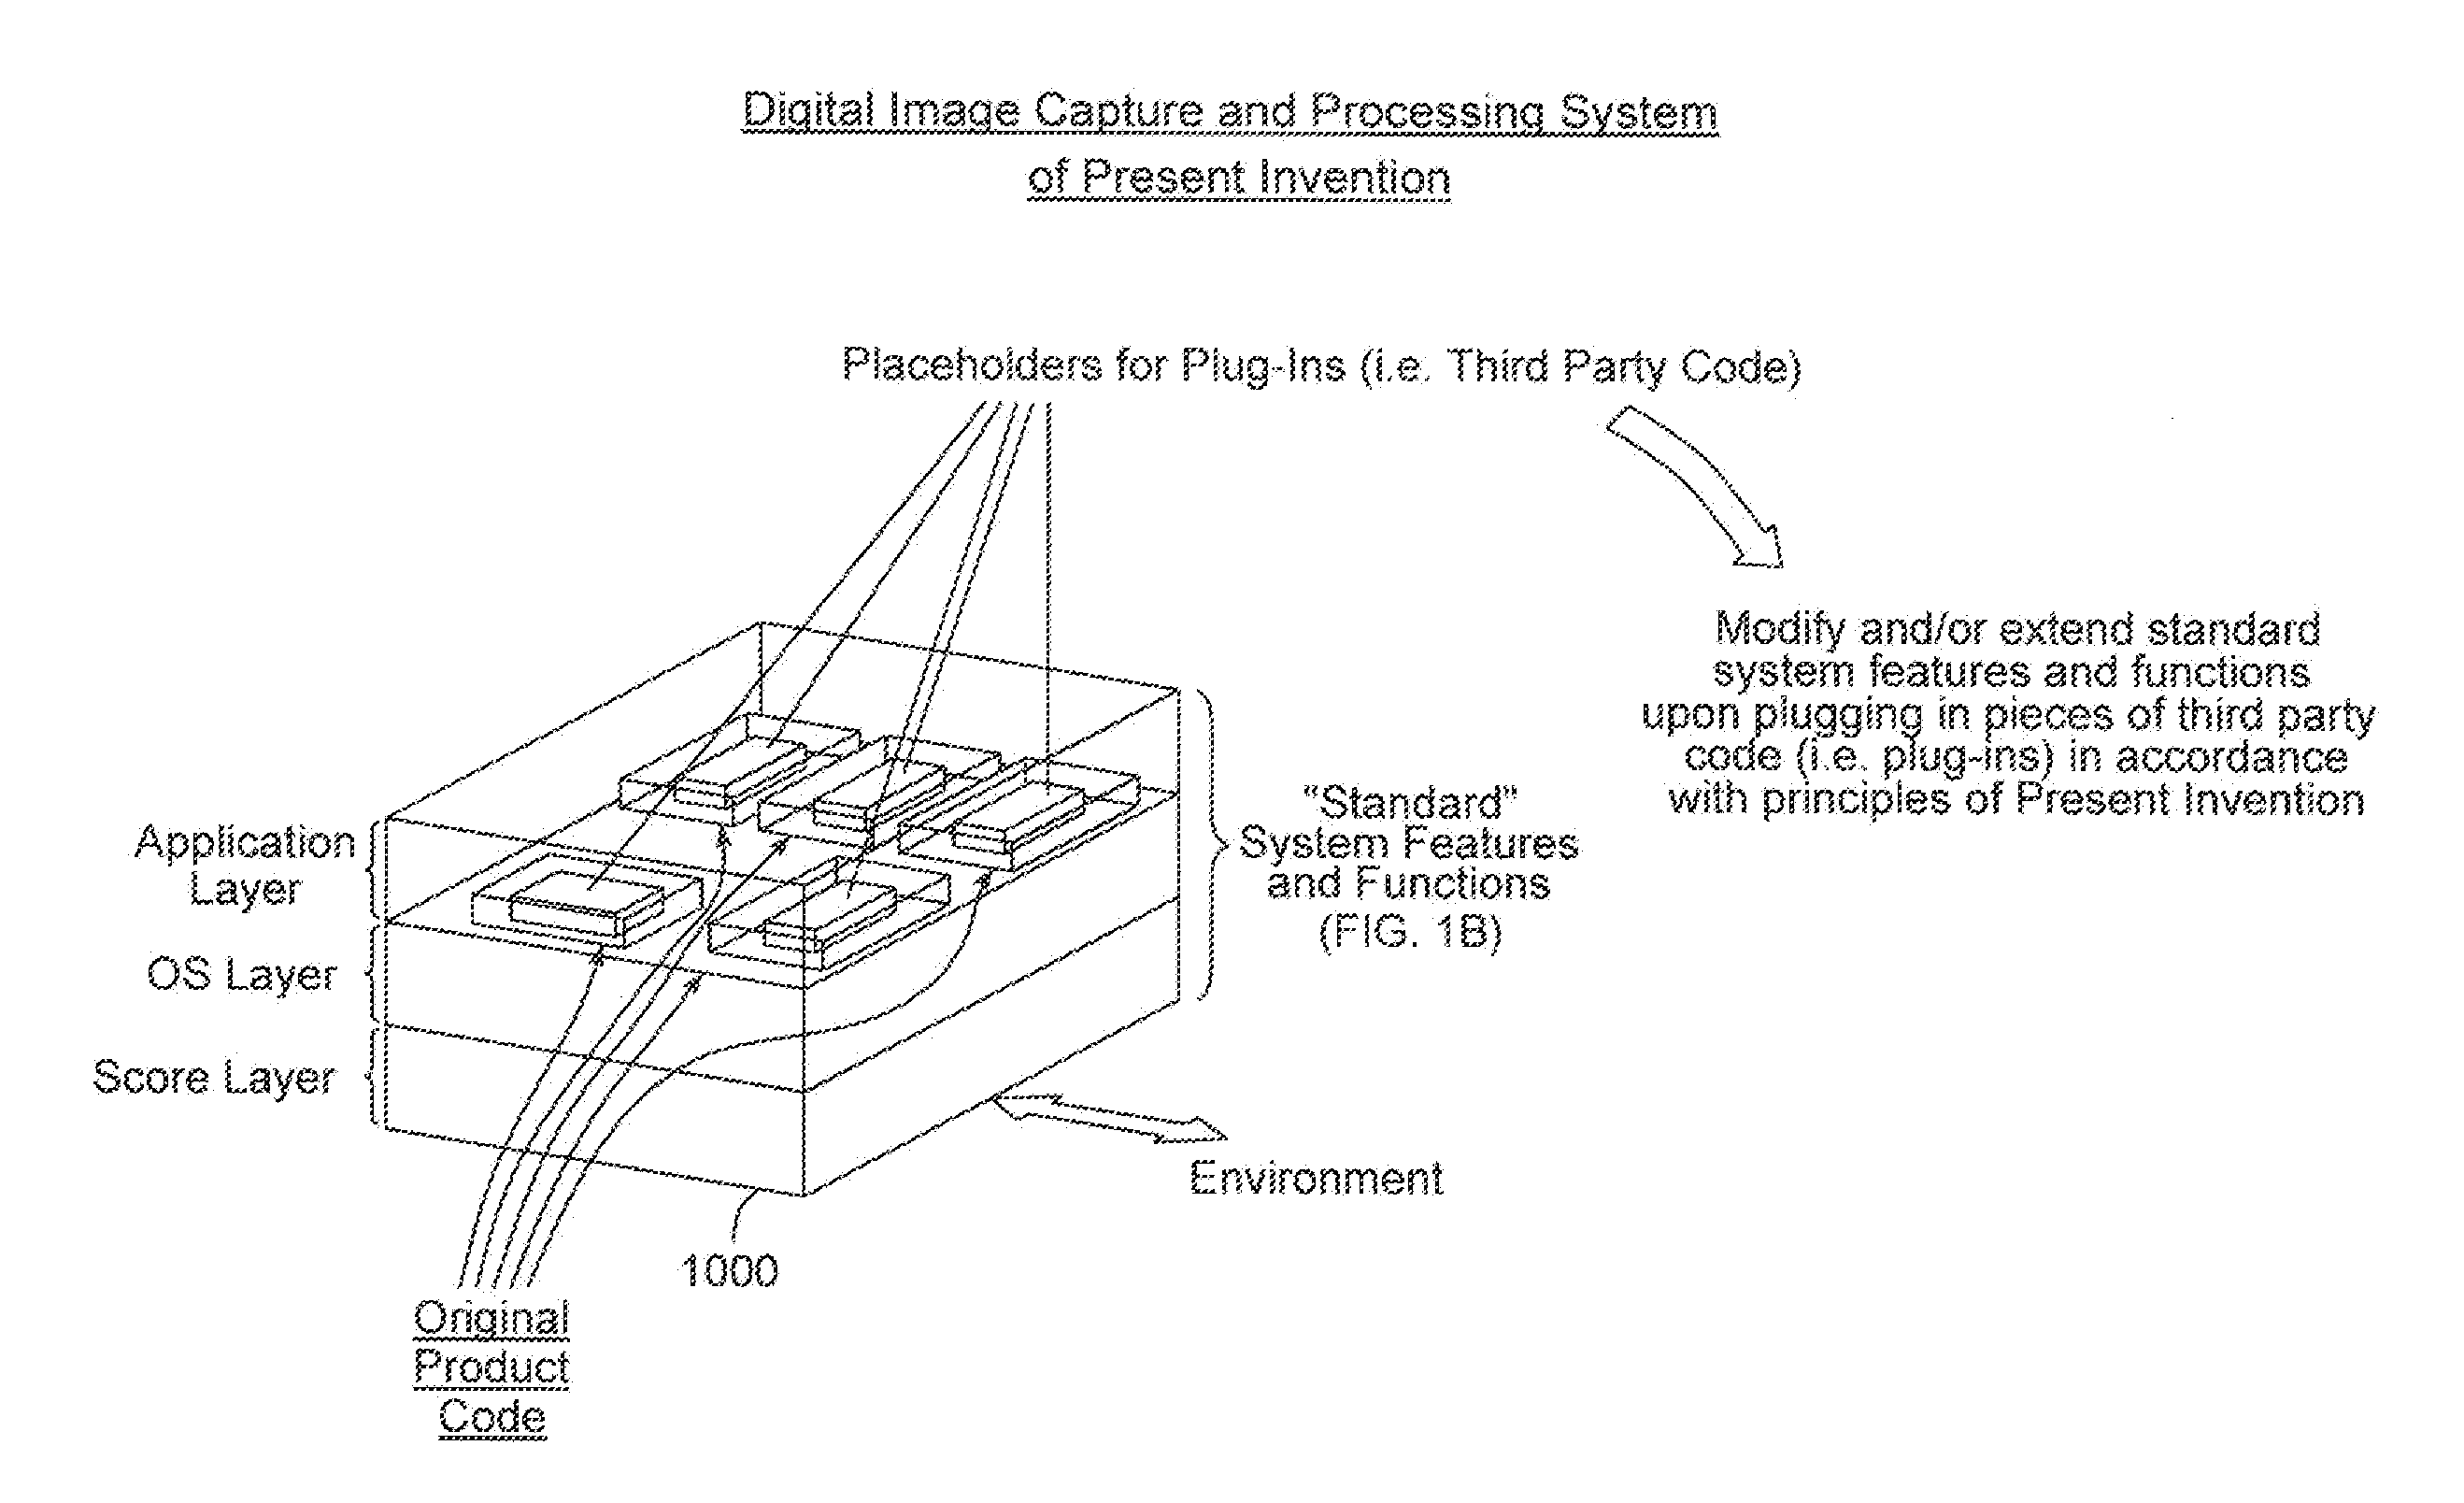 Digital image capture and processing system supporting multiple third party code plug-ins with configuration files having conditional programming logic controlling the chaining of multiple third-party plug-ins